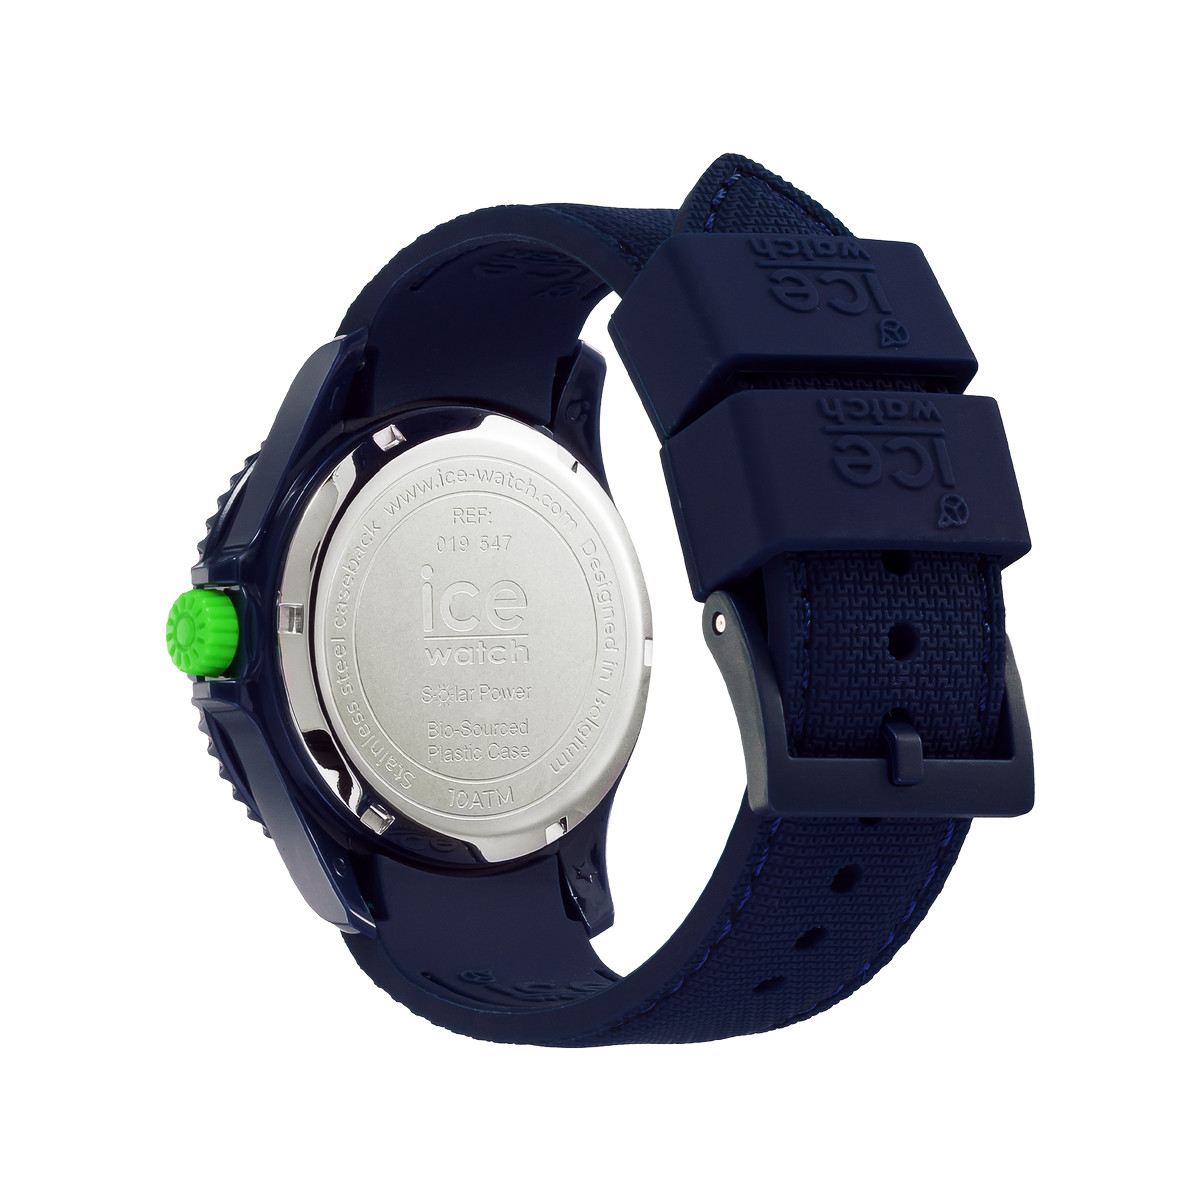 Montre Ice Watch Homme solaire silicone bleu. - vue 3